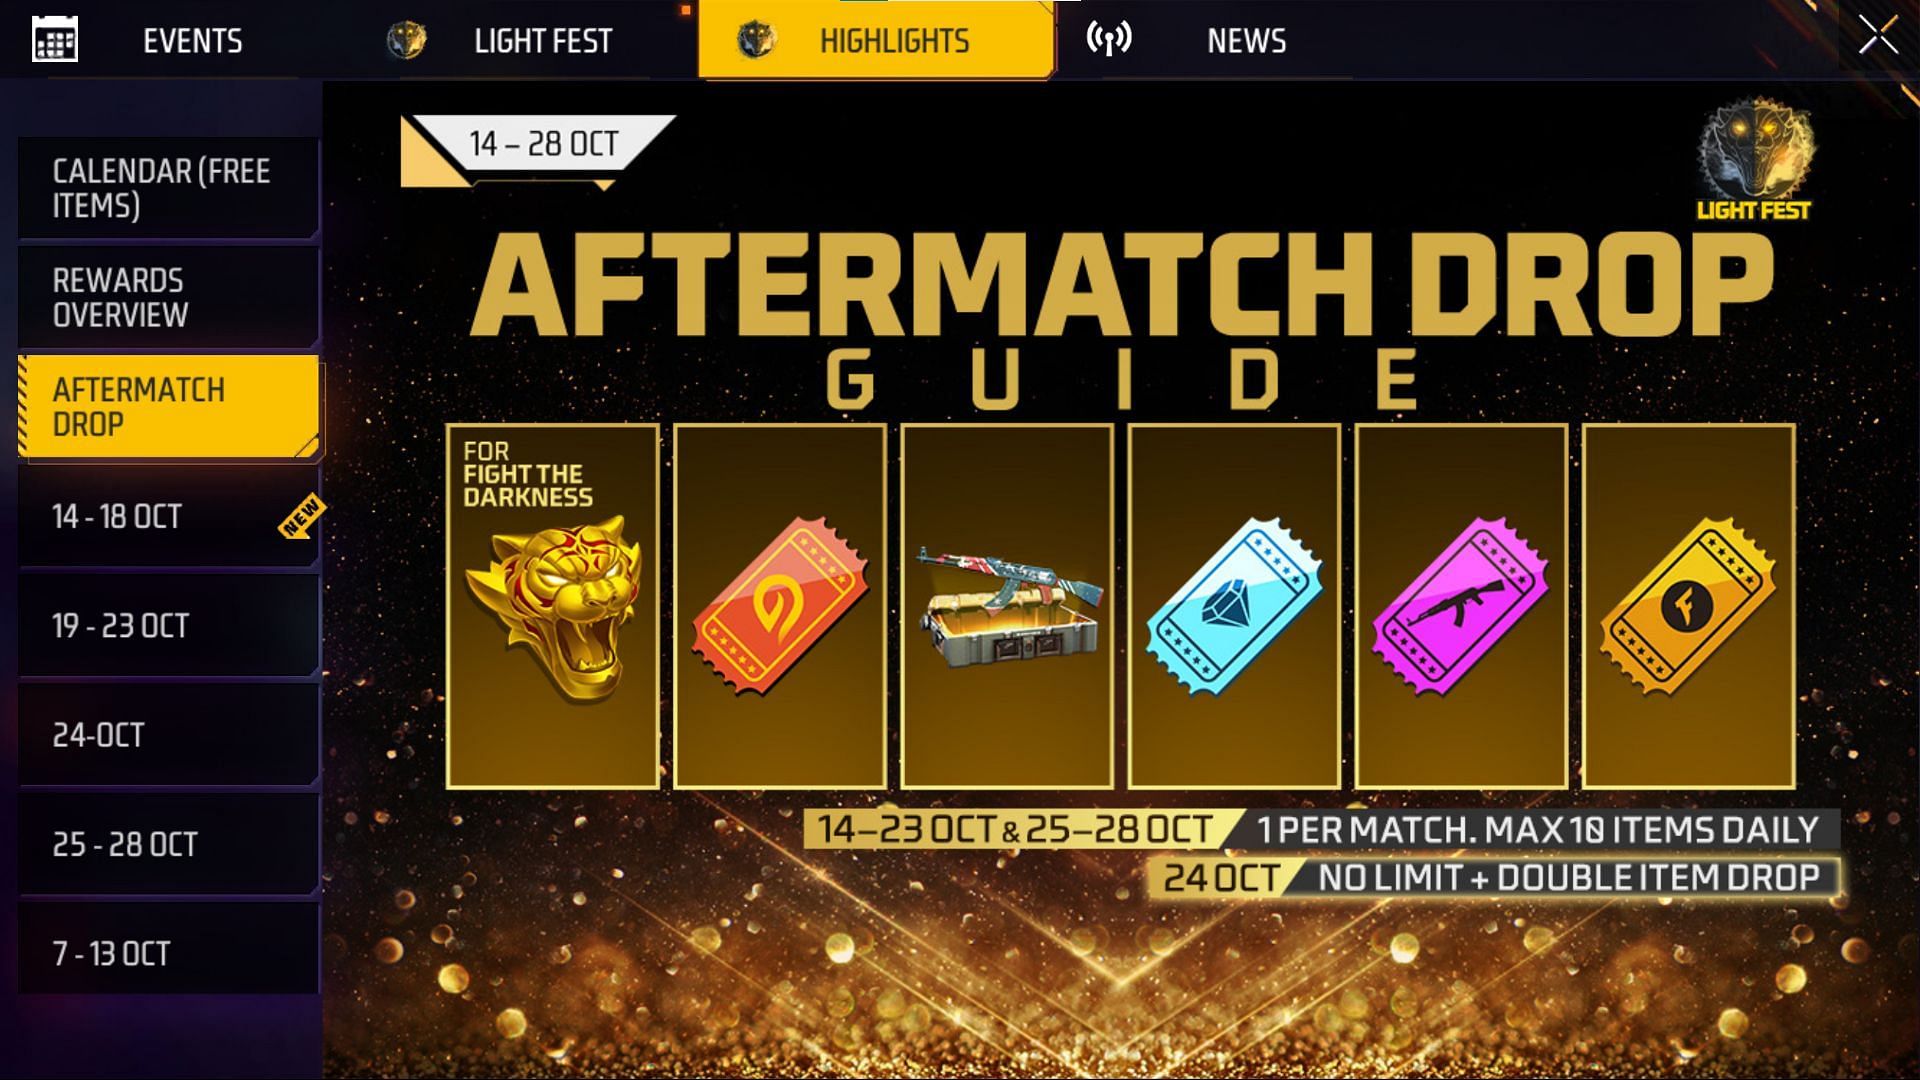 The aftermatch drop guide in Free Fire MAX (Image via Garena)